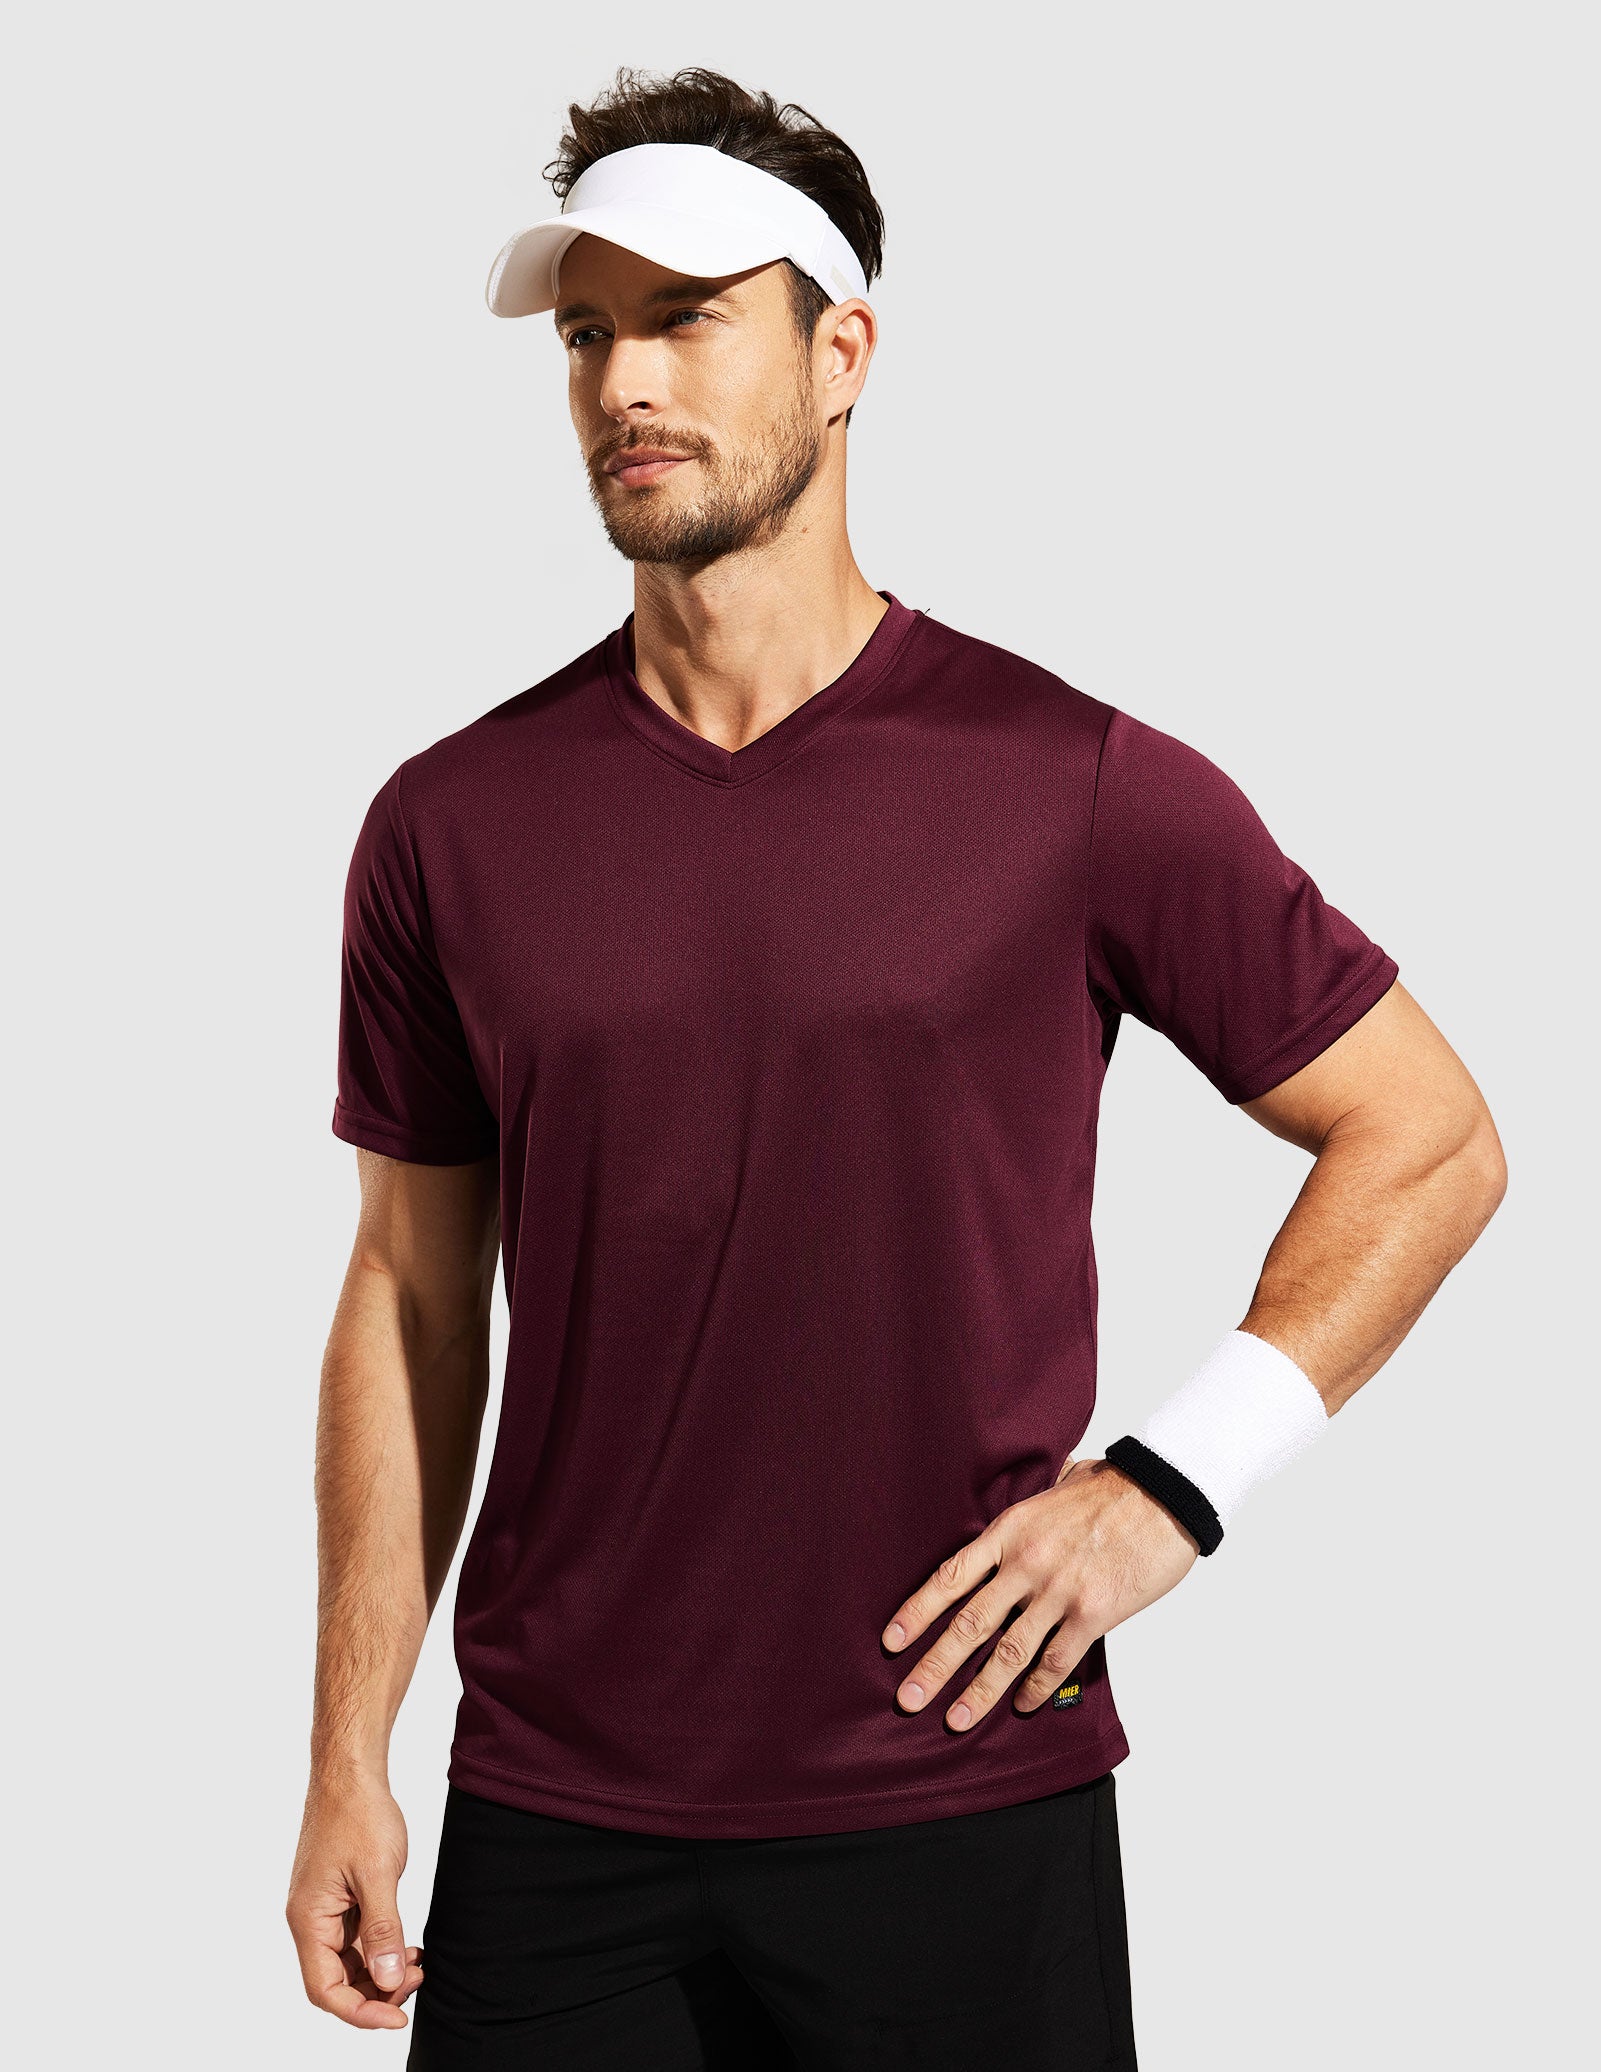 Men's Quick Dry Athletic Shirts V Neck Workout T-Shirts